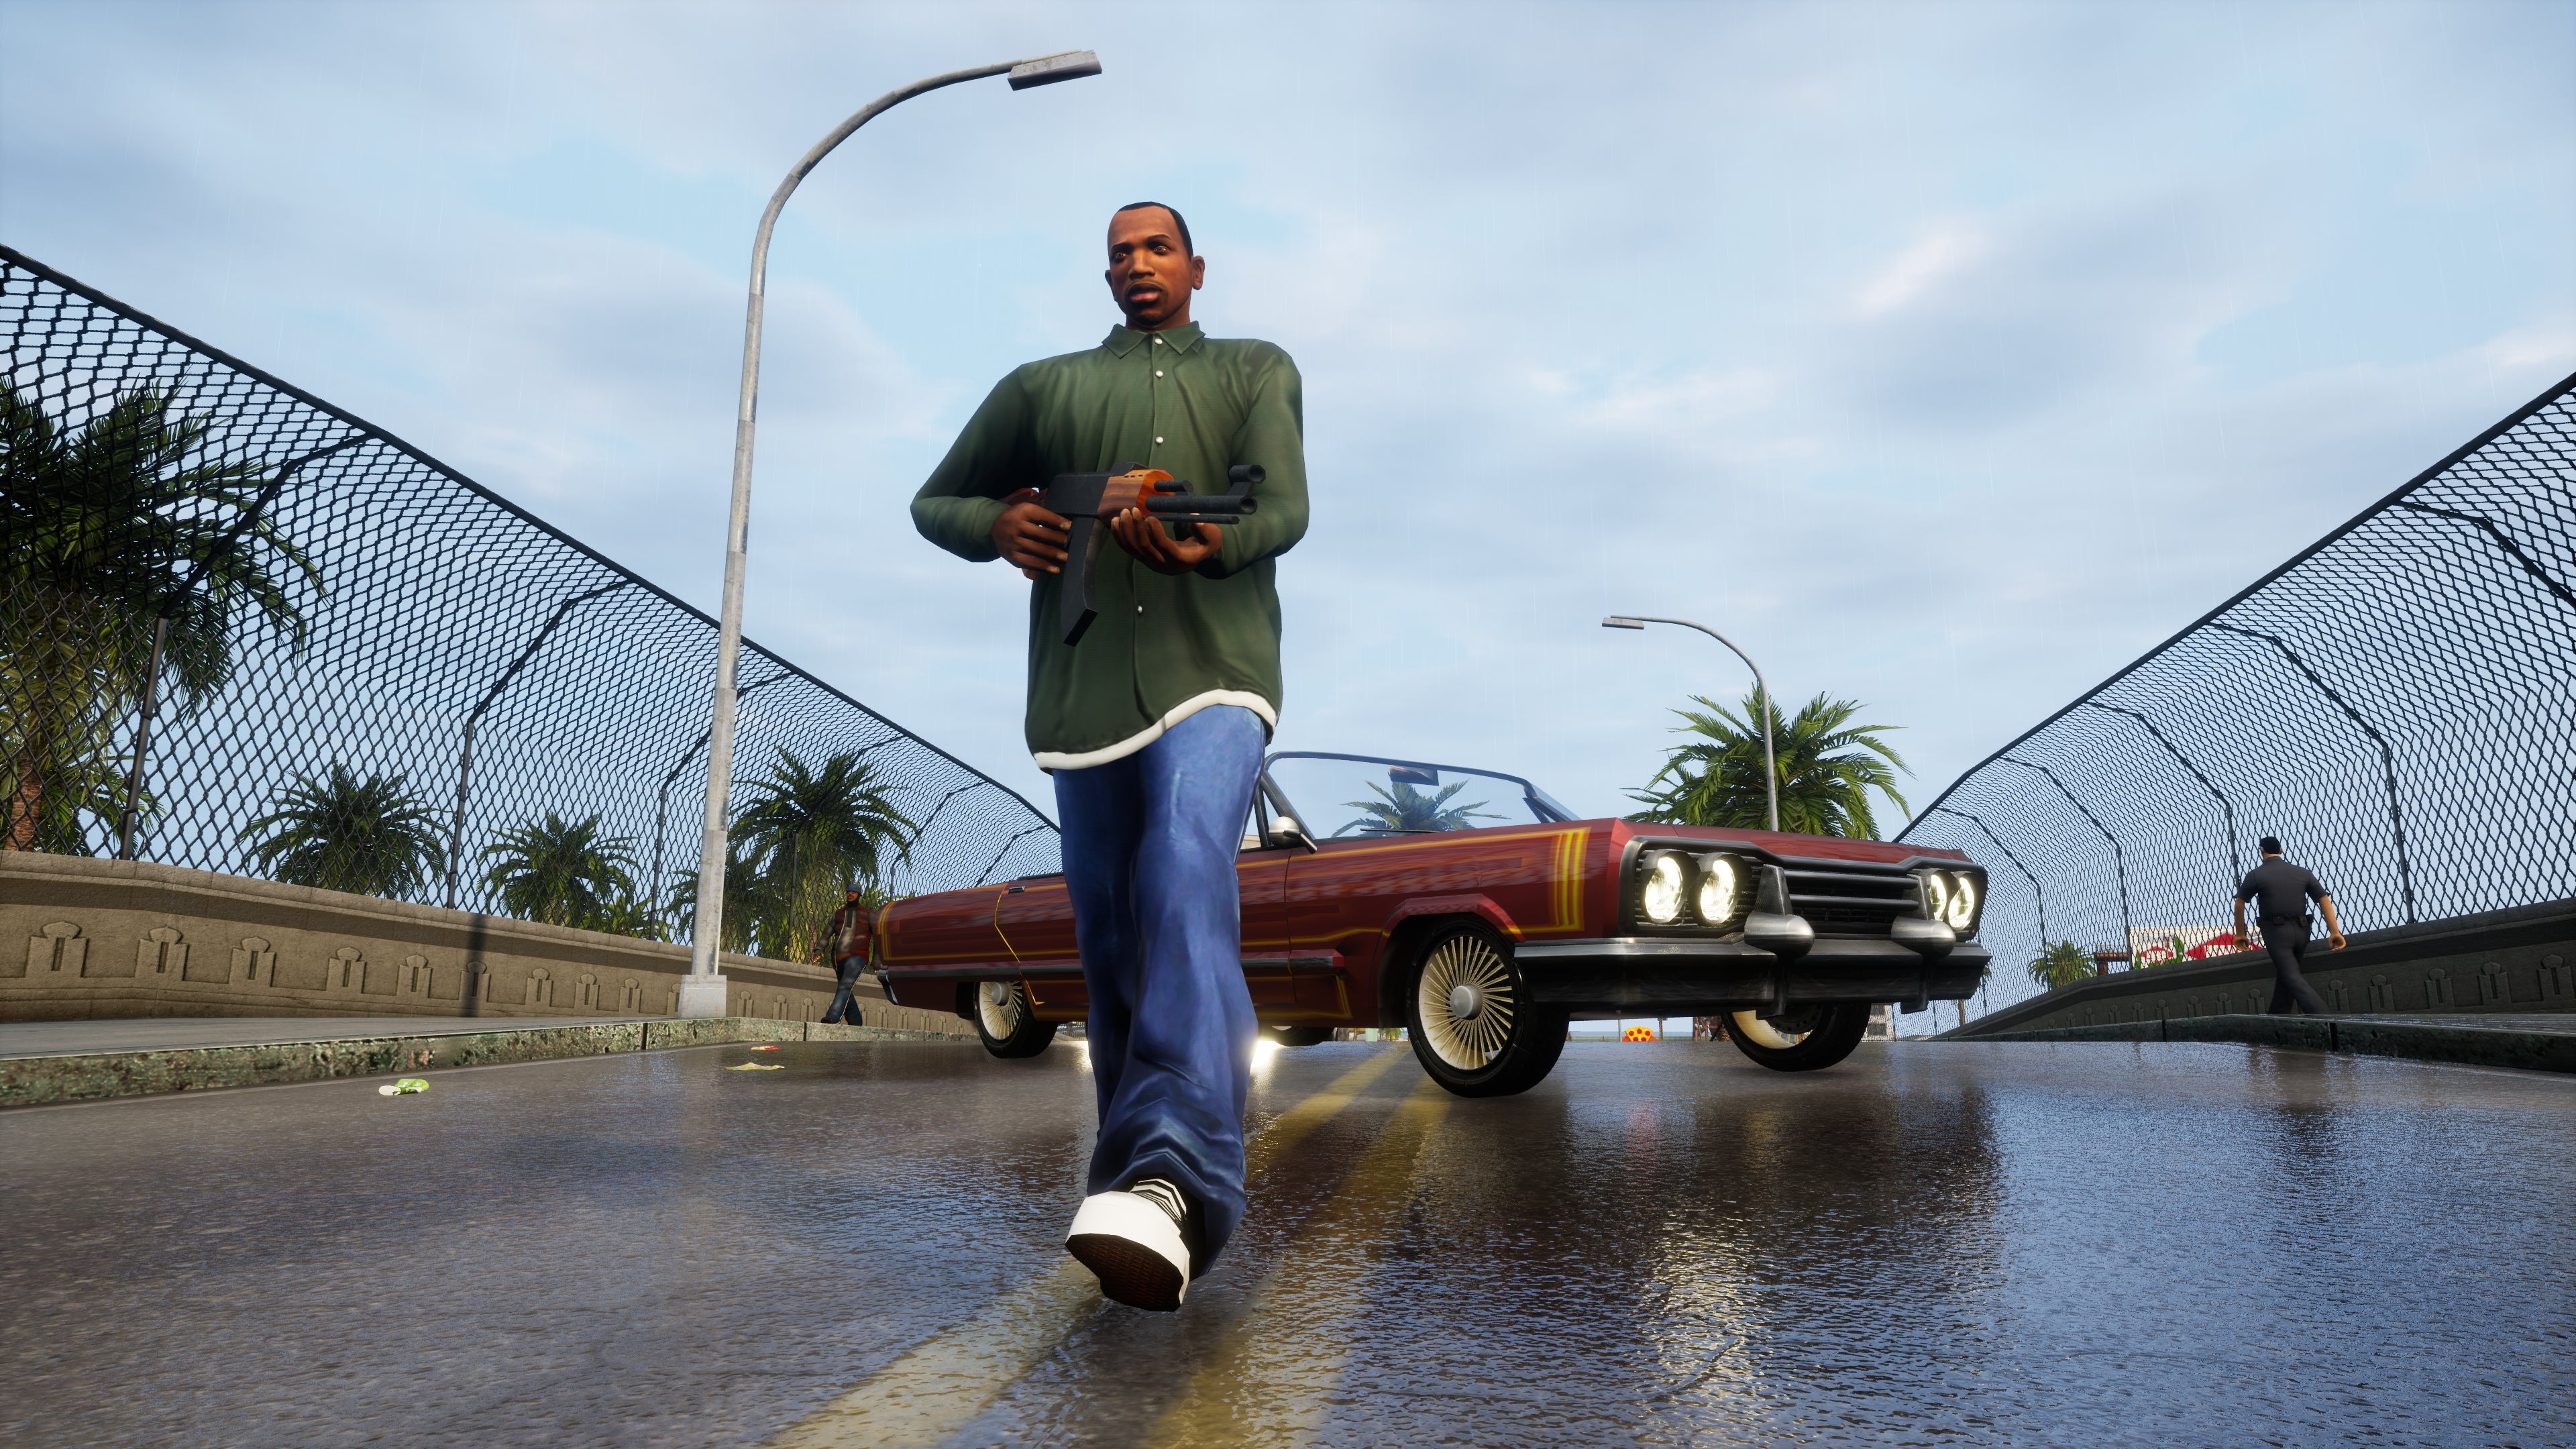 Image for GTA San Andreas cheats - Switch, PC, PlayStation, and Xbox - spawn vehicles and weapons